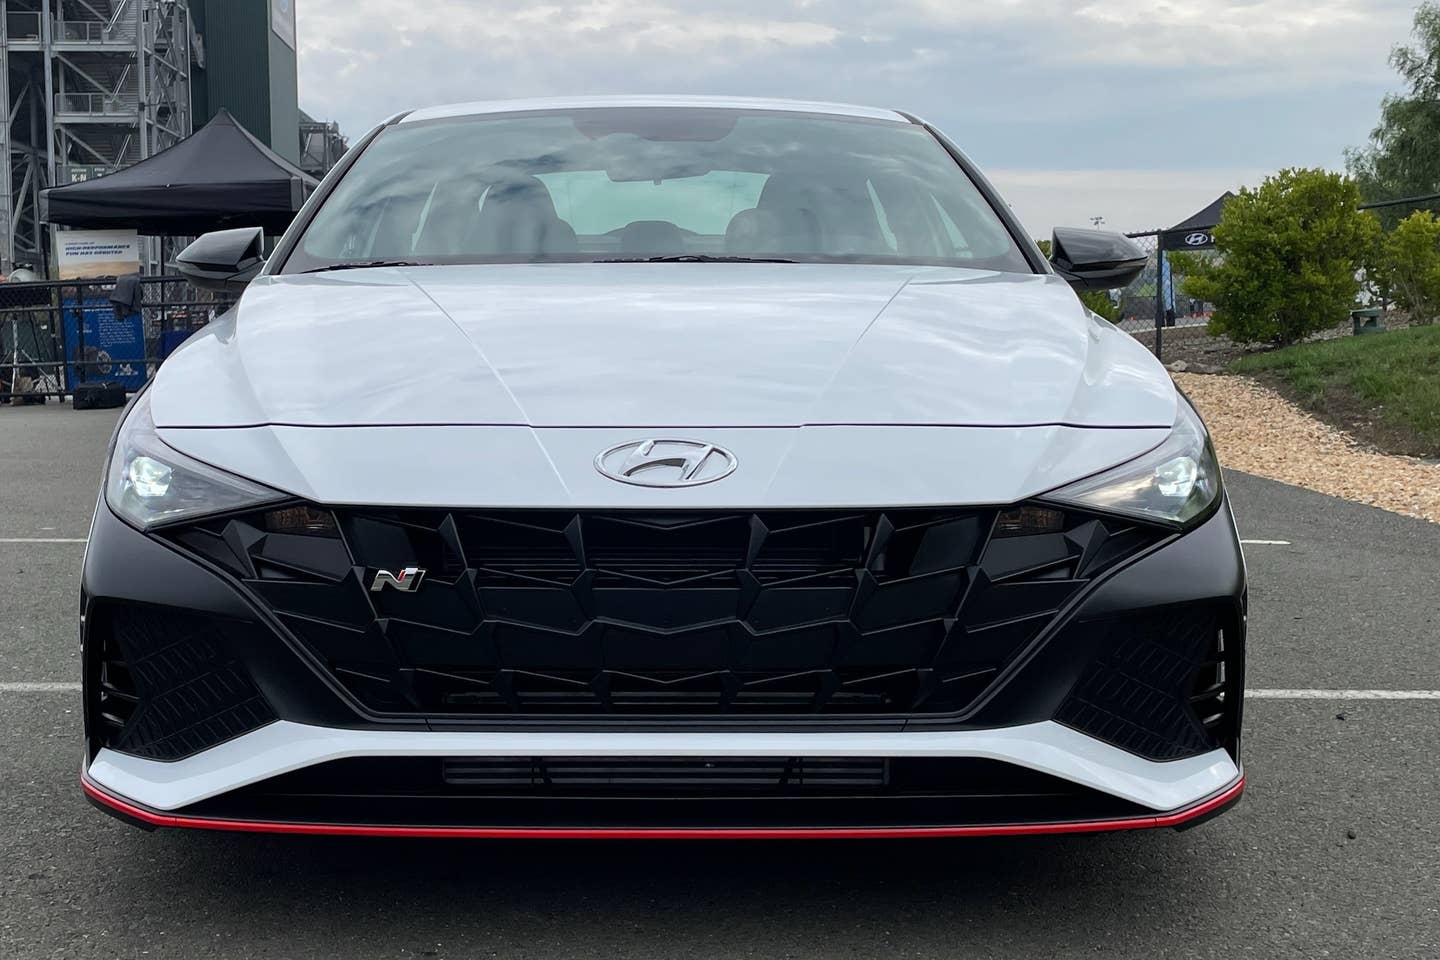 2022 Hyundai Elantra N First Drive Review: Among the Best Compact Sport ...